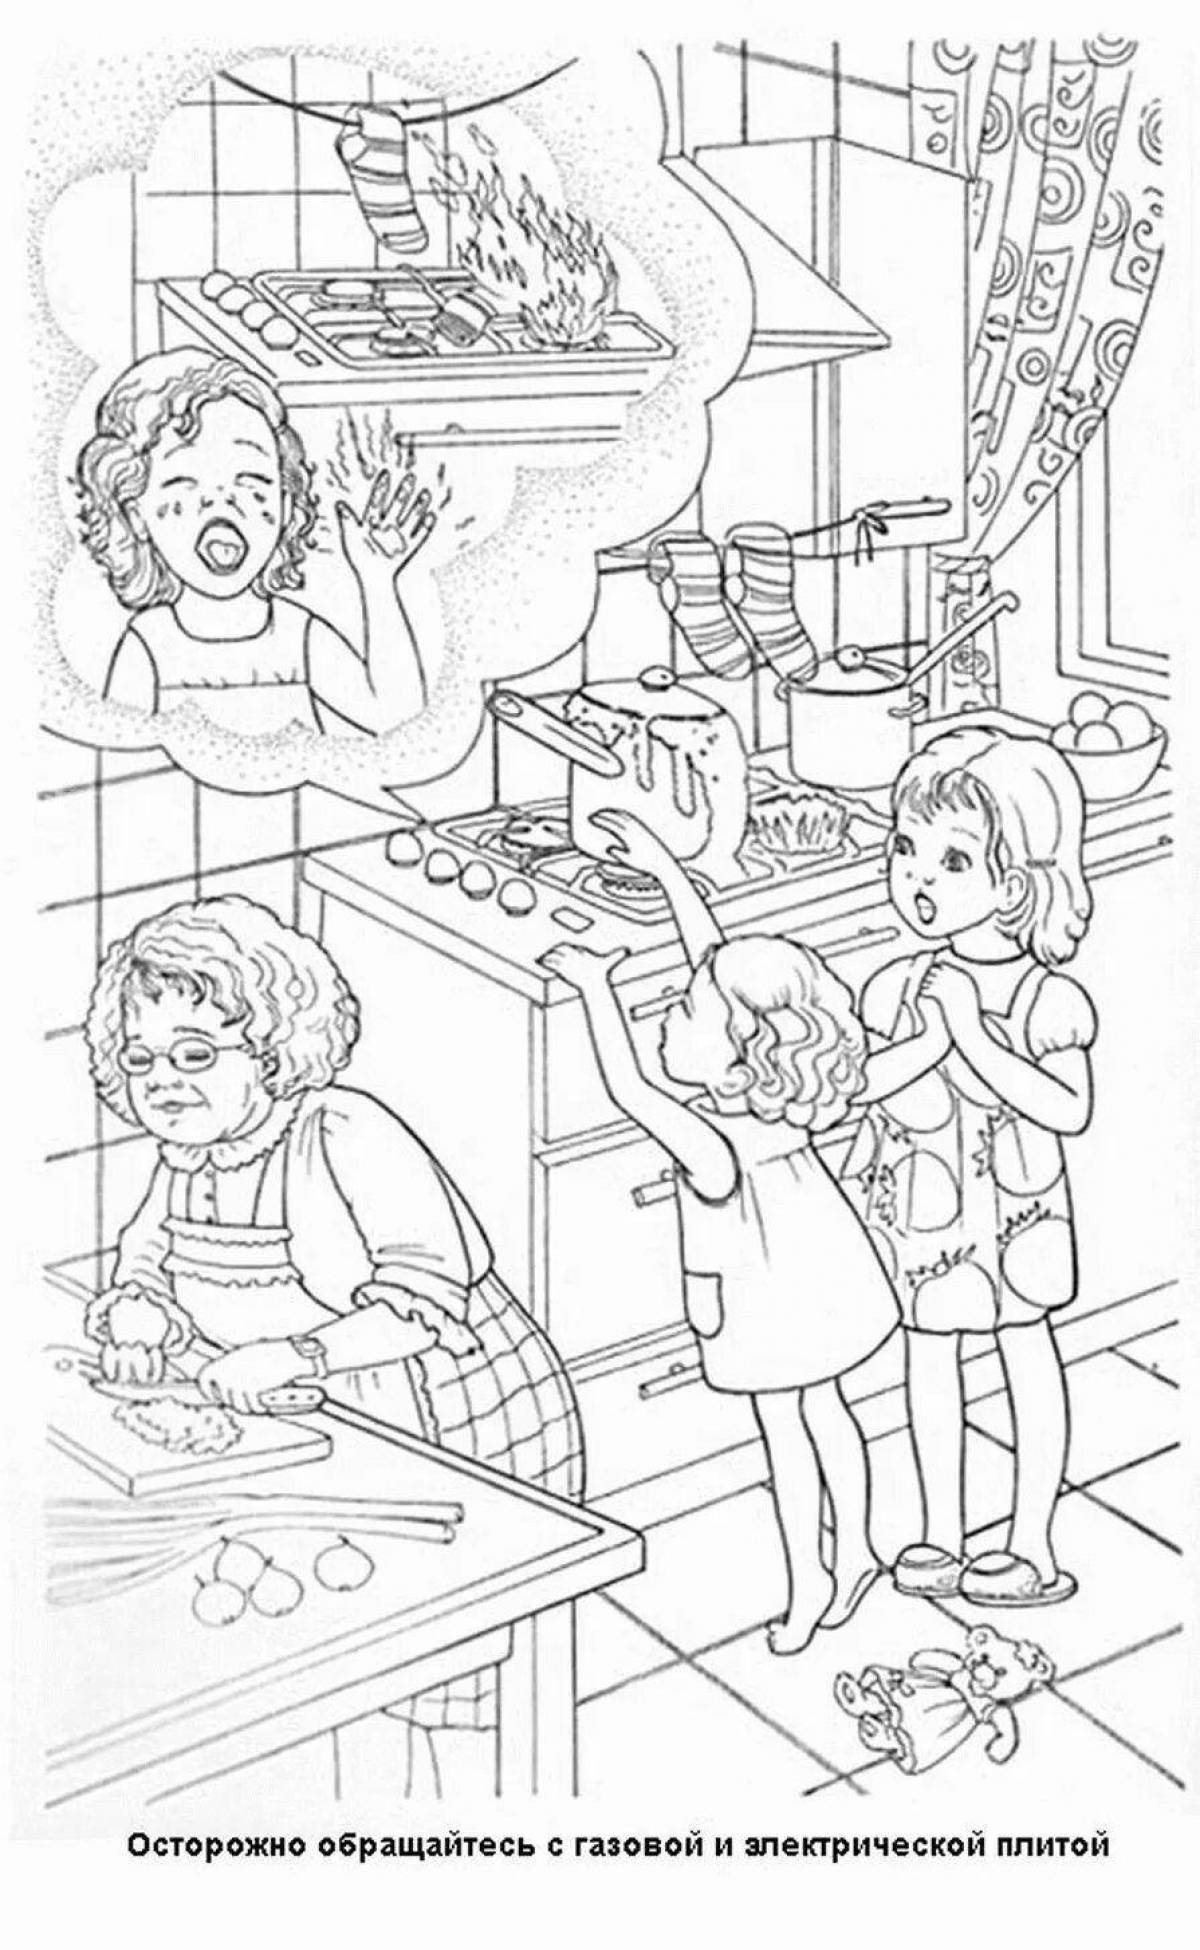 Colourful coloring book to keep children safe at home